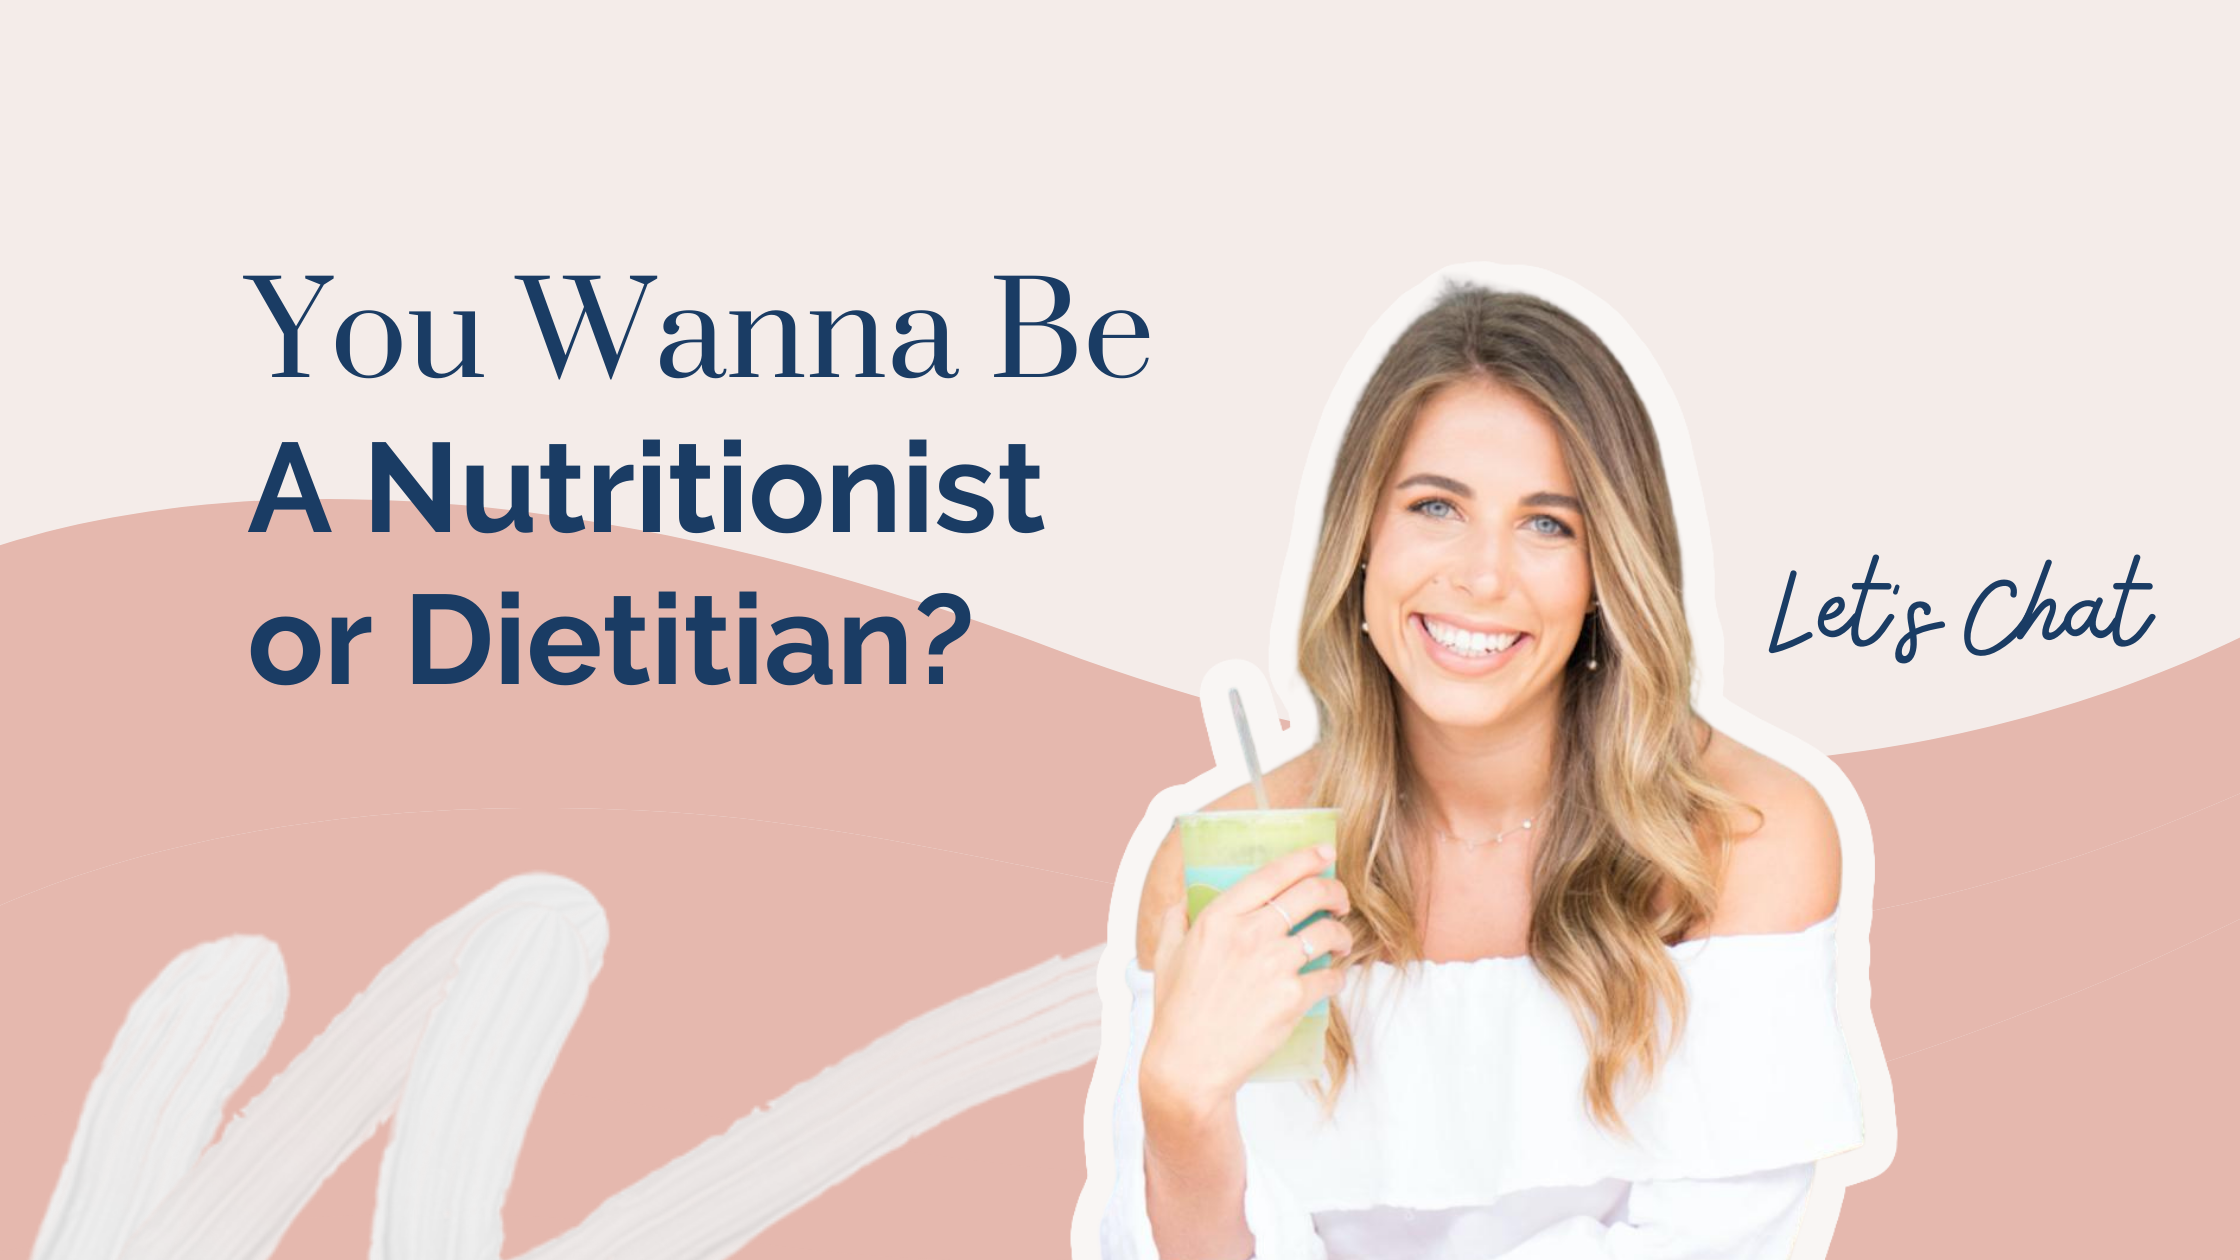 How to become a nutritionist or dietitian